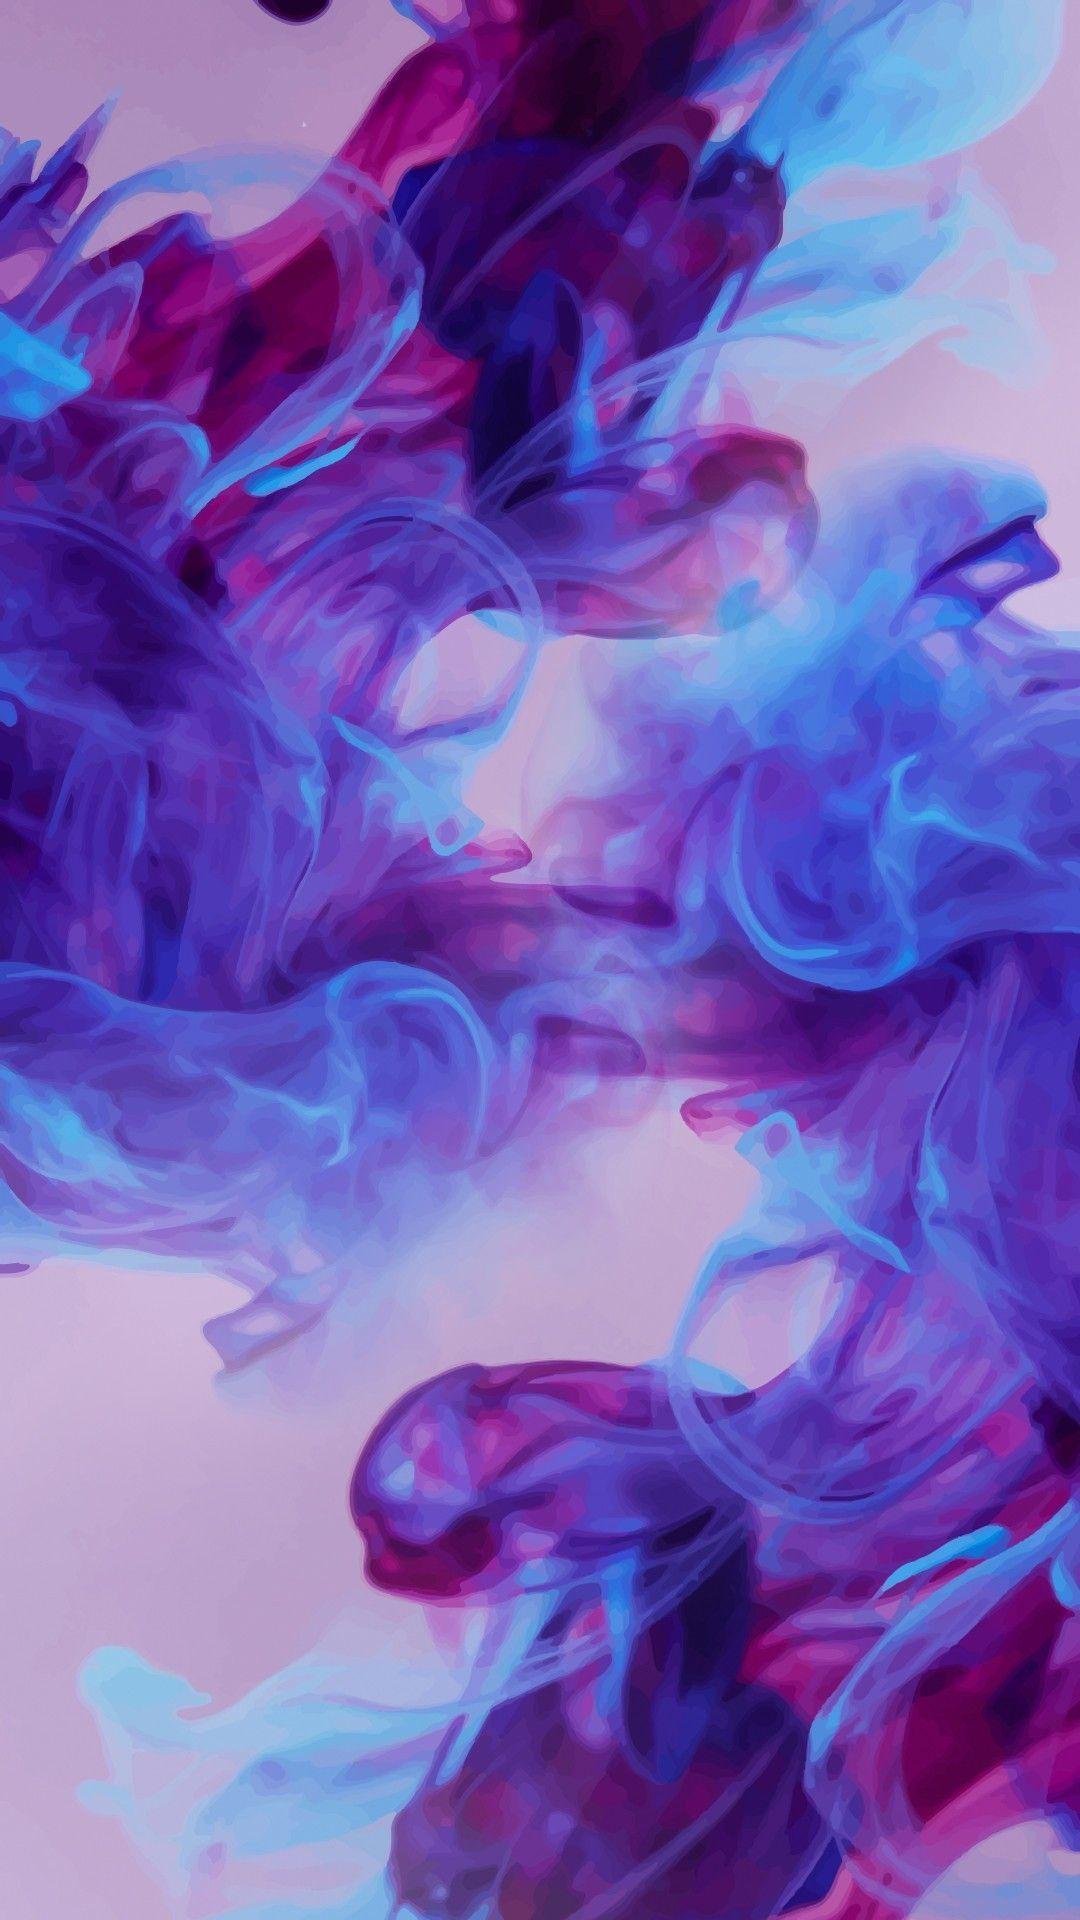 Best 5 Purple Wallpaper Image For Your Android or iPhone Wallpaper #android #iphone #wallpaper. iPhone wallpaper smoke, Galaxy wallpaper, Phone wallpaper